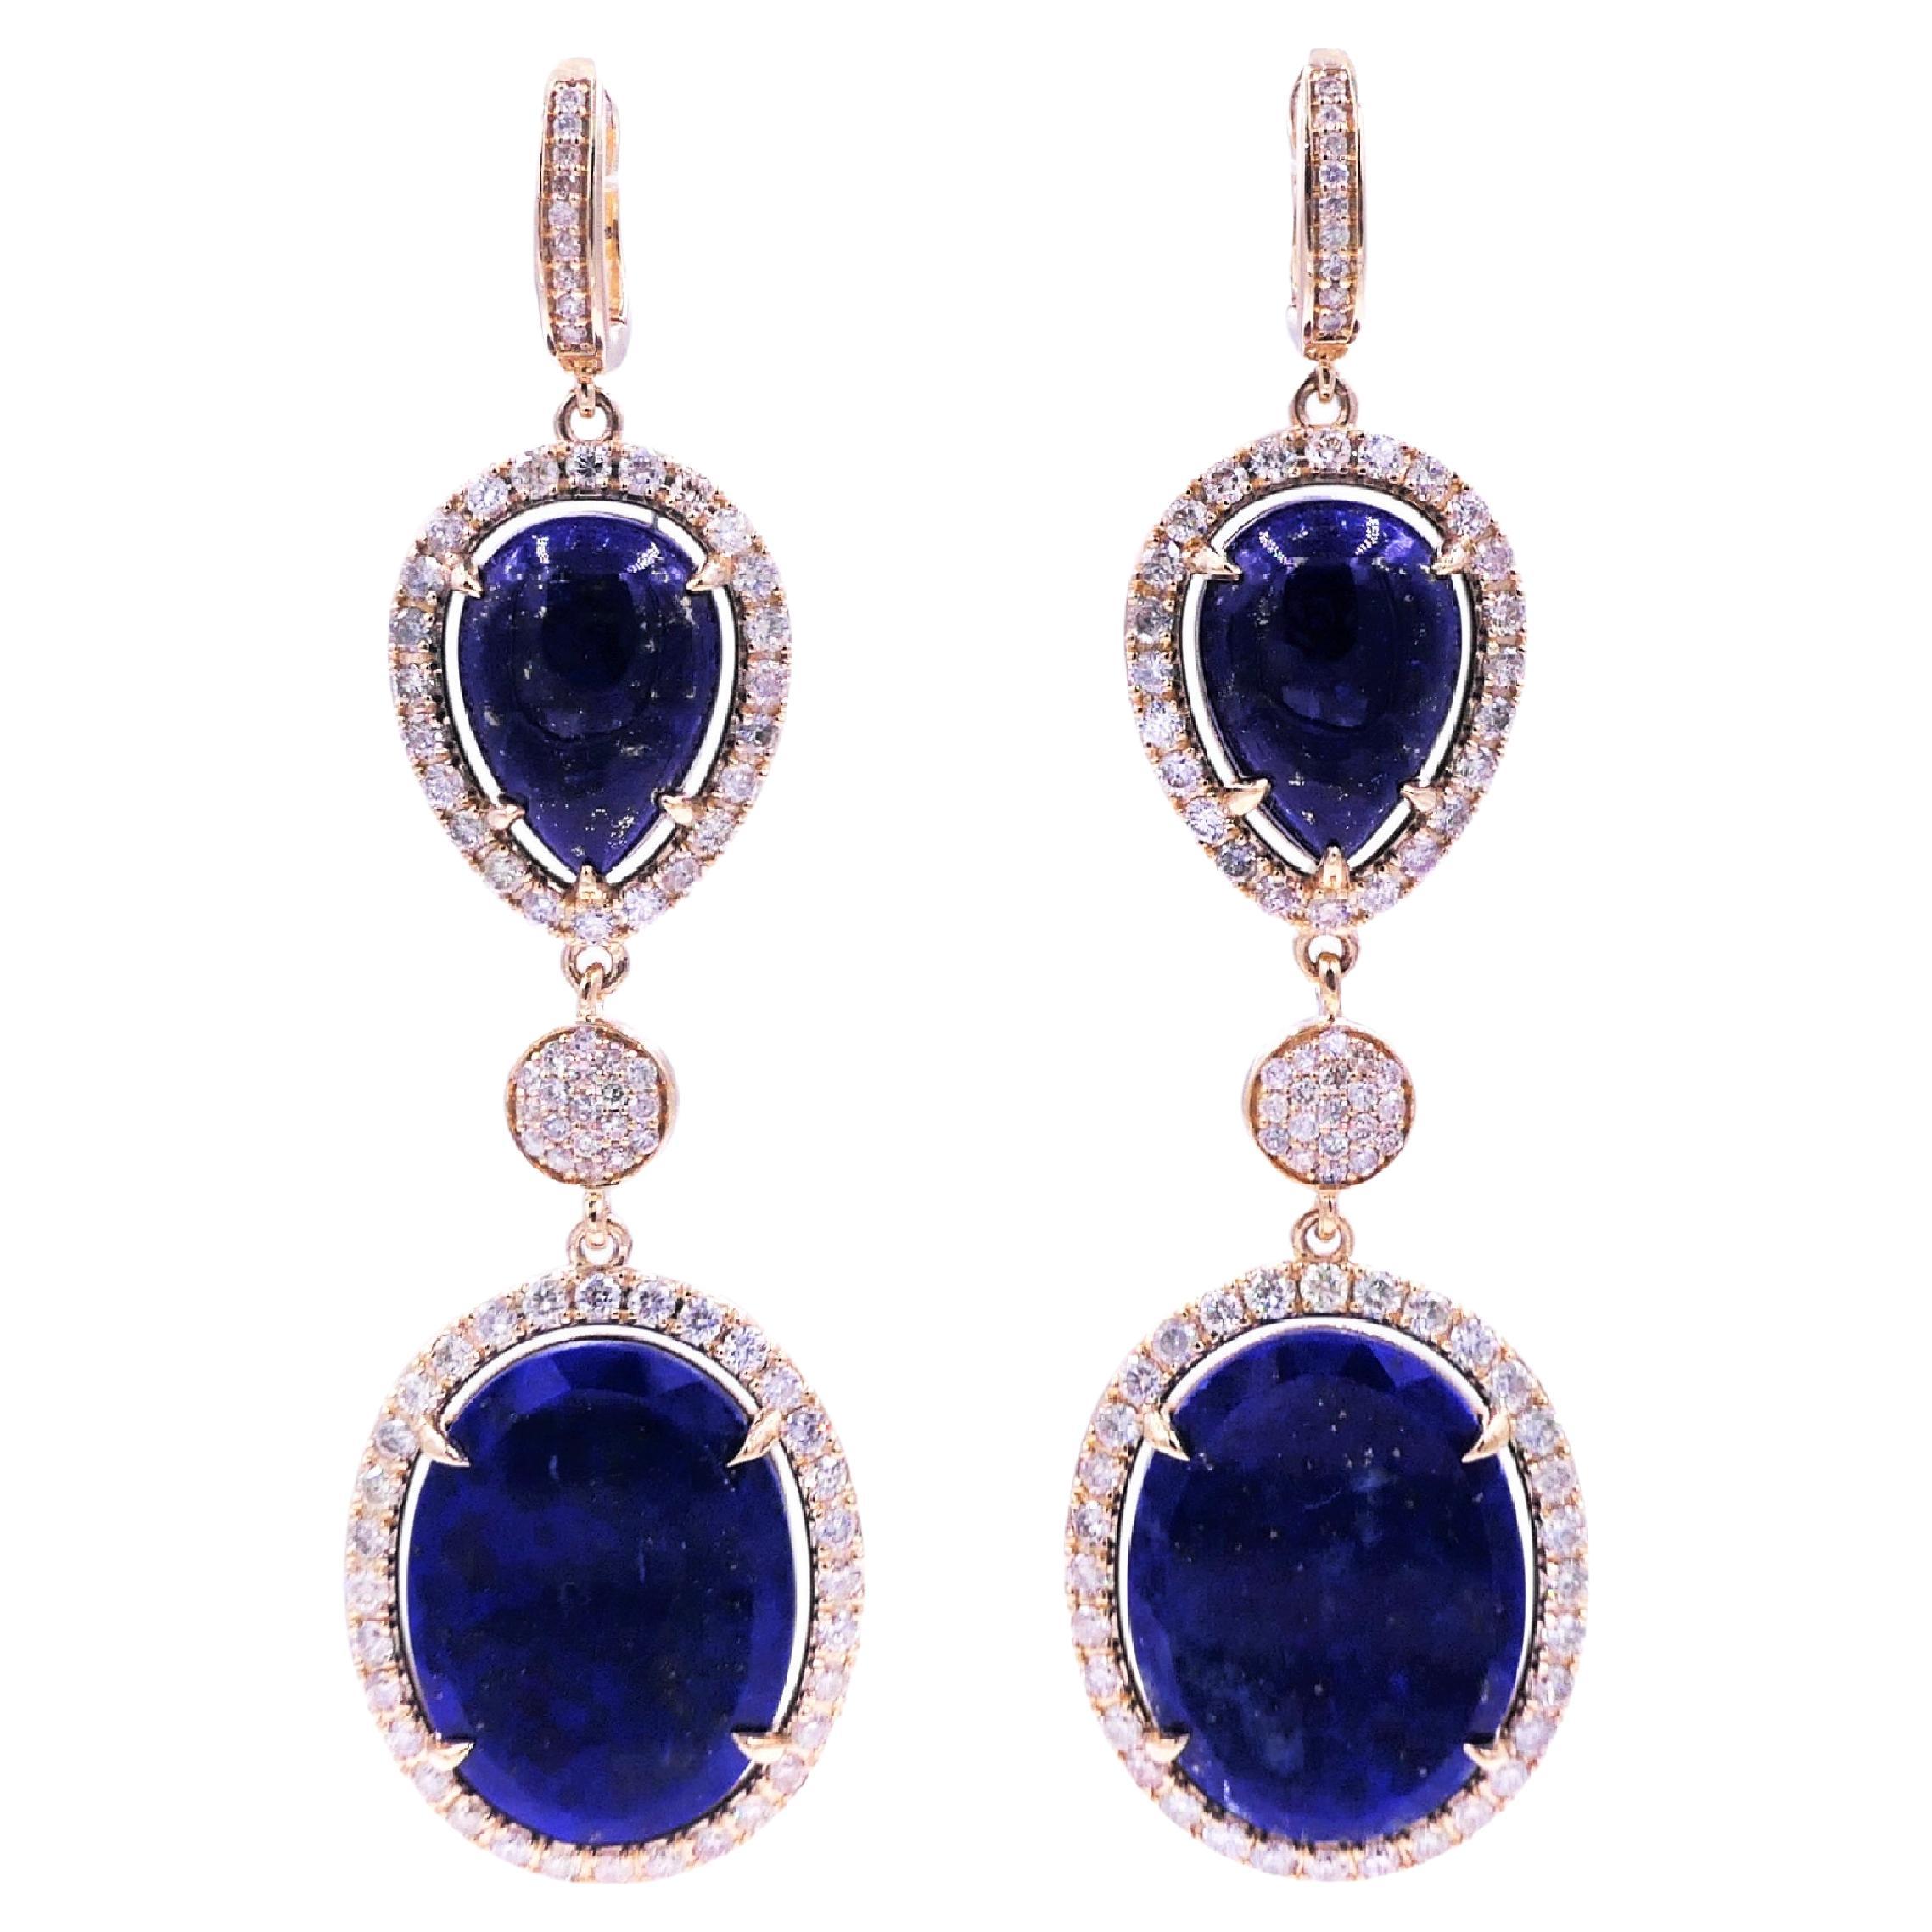 Blue Lapis Lazuli Cabochon Diamond Pave Halo Drop Dangle Yellow Gold Earrings
14 Karat Yellow Gold
2.00 CT Diamonds
Genuine Blue Lapis Lazuli Cabochon Slices

Important Information:
Please note that this item will take 2-4 weeks to deliver - it is